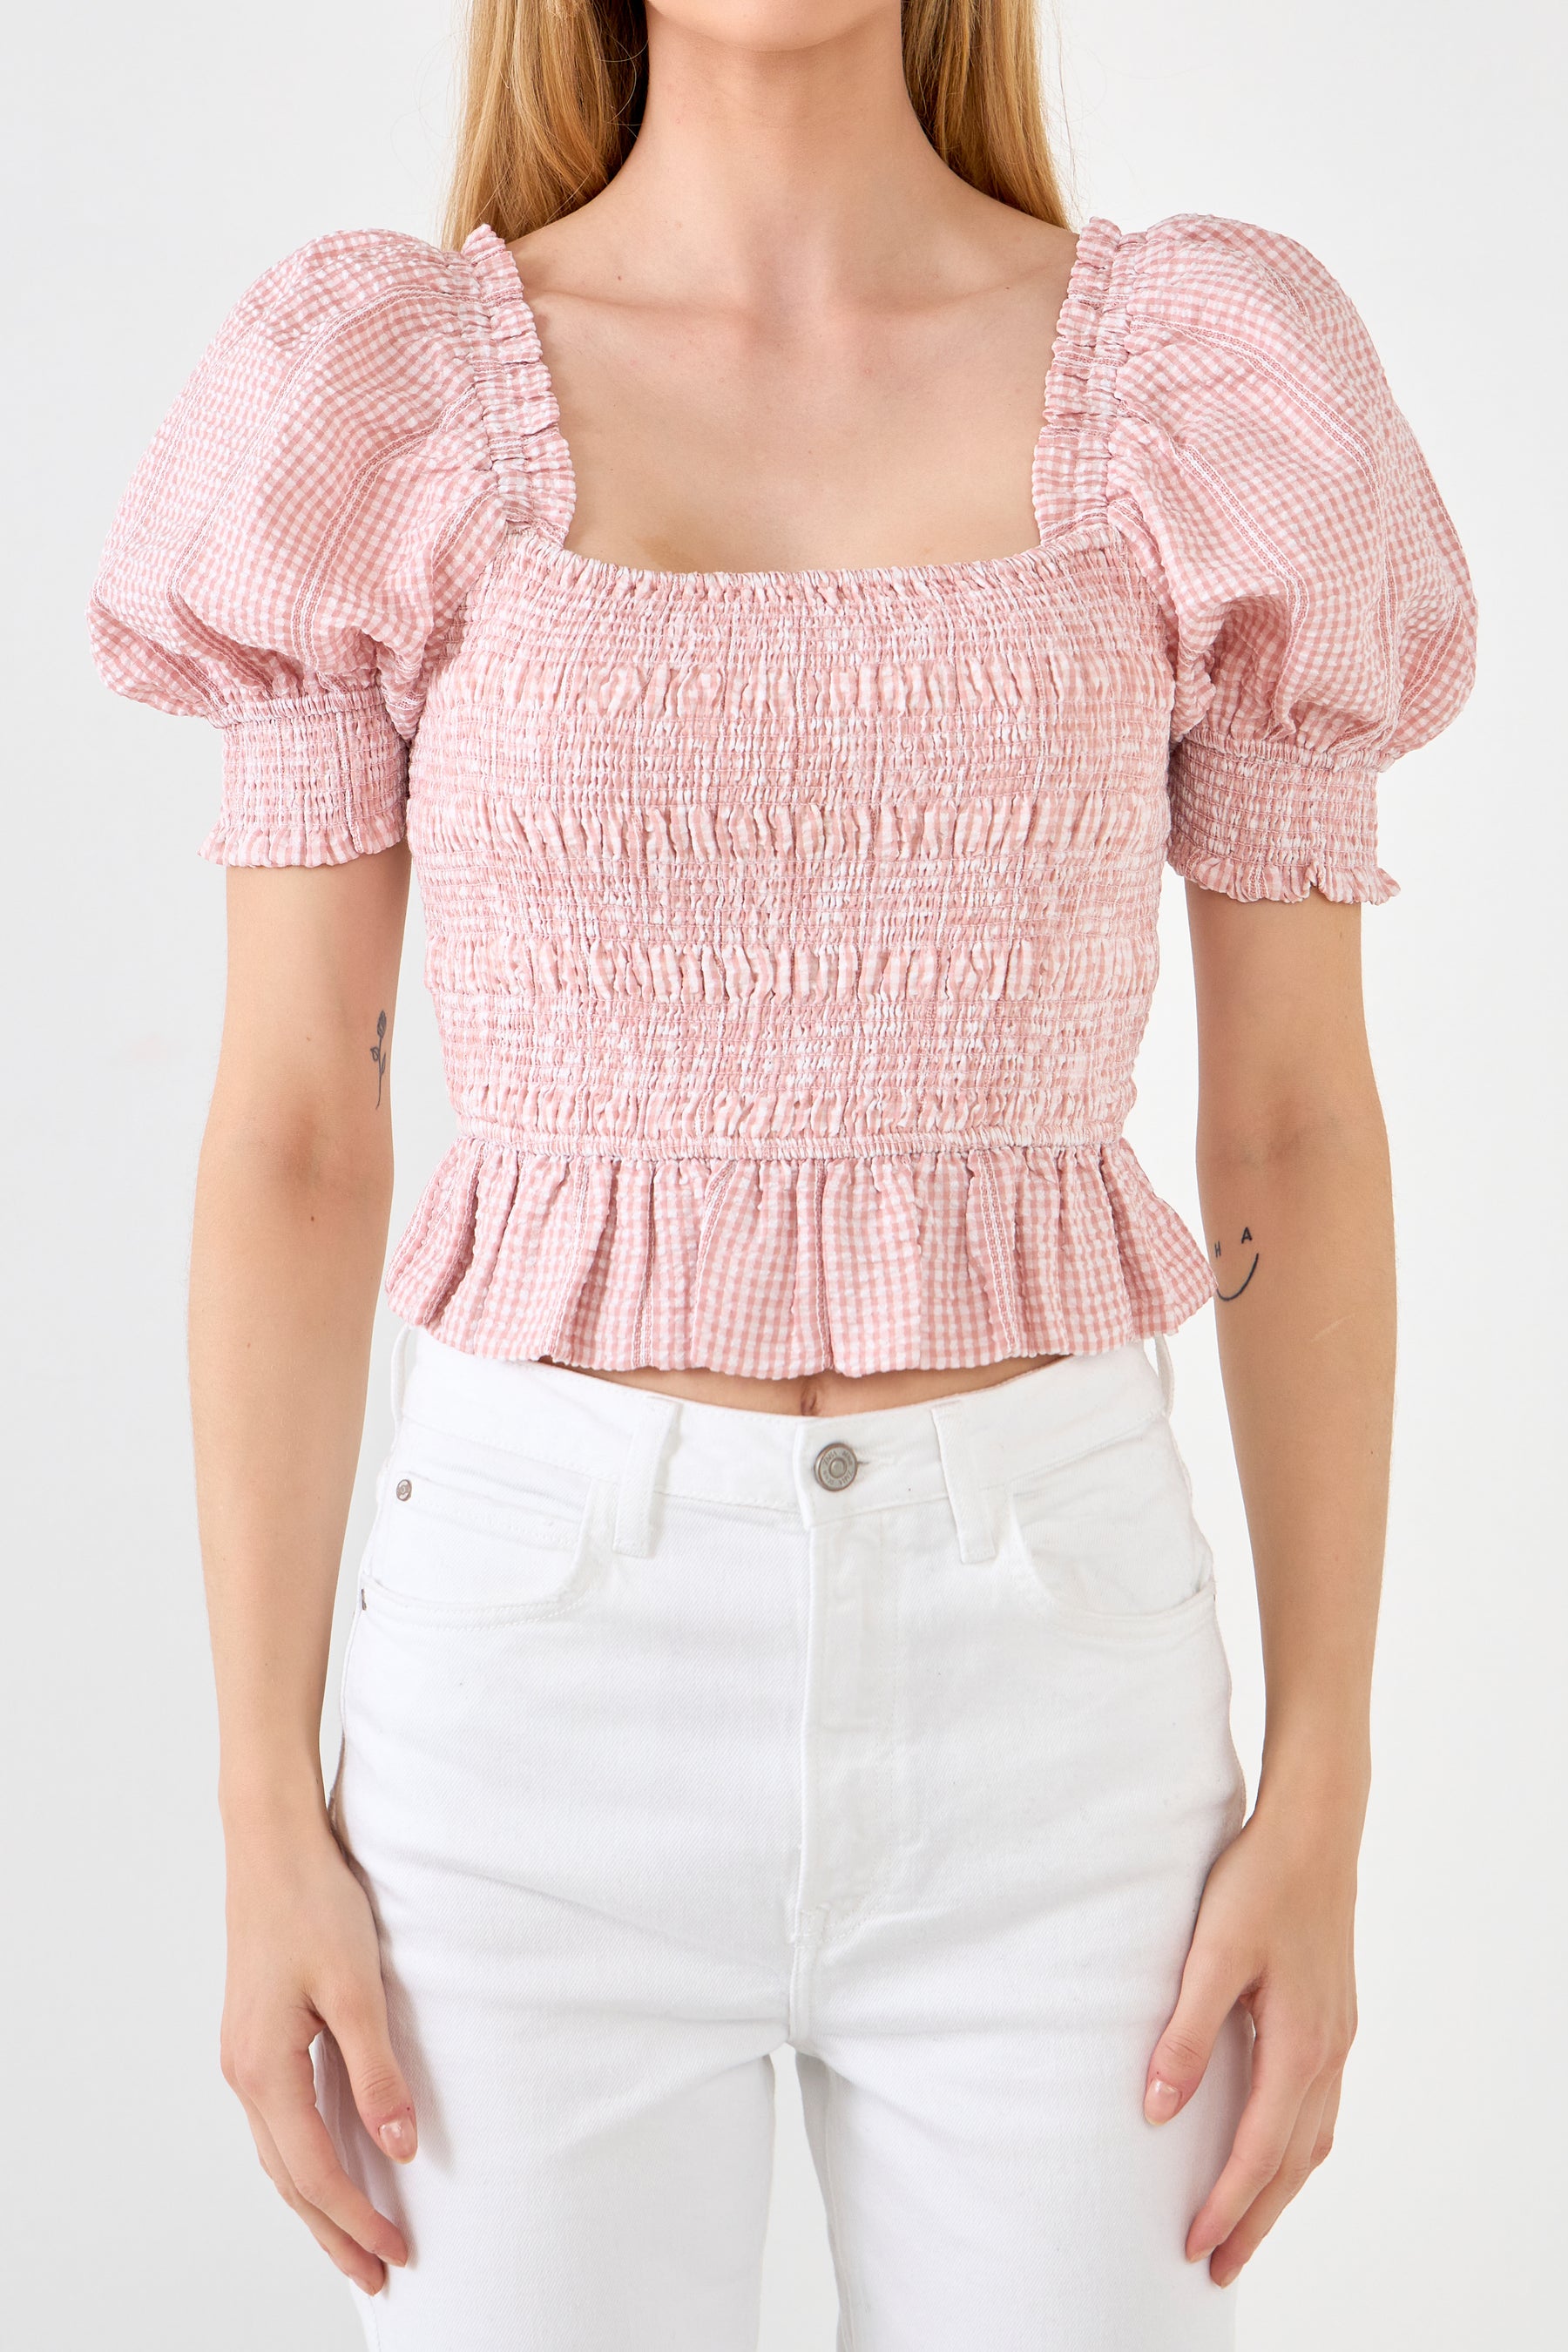 FREE THE ROSES - Smocked Top - TOPS available at Objectrare